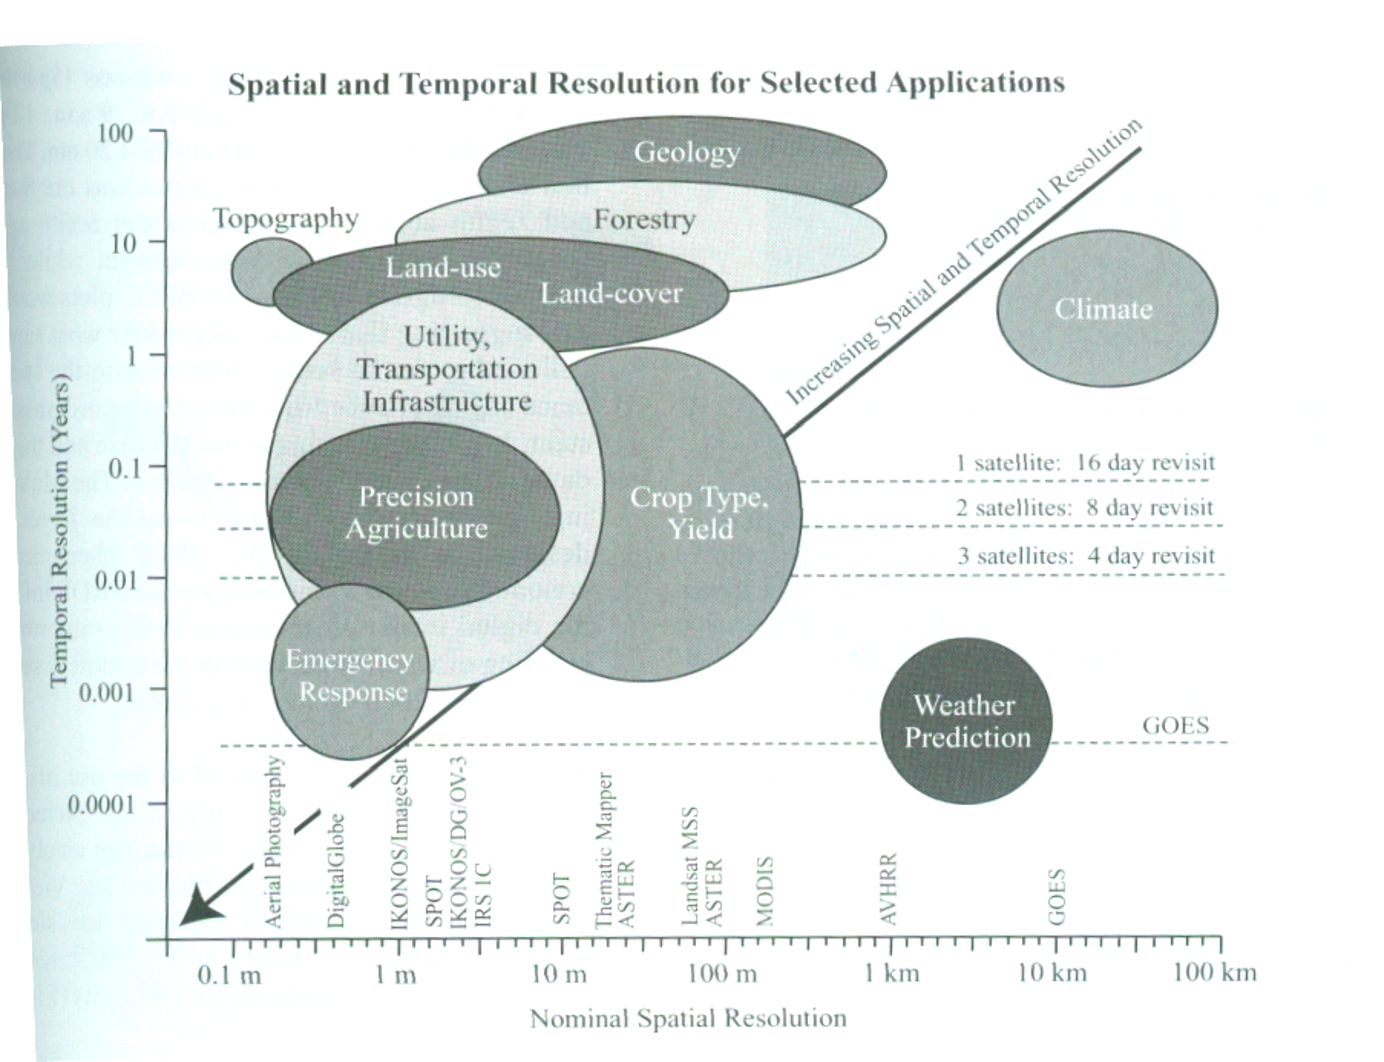 How different temporal and spatial resolutions common in earth observation relate to geospatial applications they can be used on (Source: [Jensen (2007)](https://www.pearson.com/us/higher-education/program/Jensen-Remote-Sensing-of-the-Environment-An-Earth-Resource-Perspective-2nd-Edition/PGM200207.html))